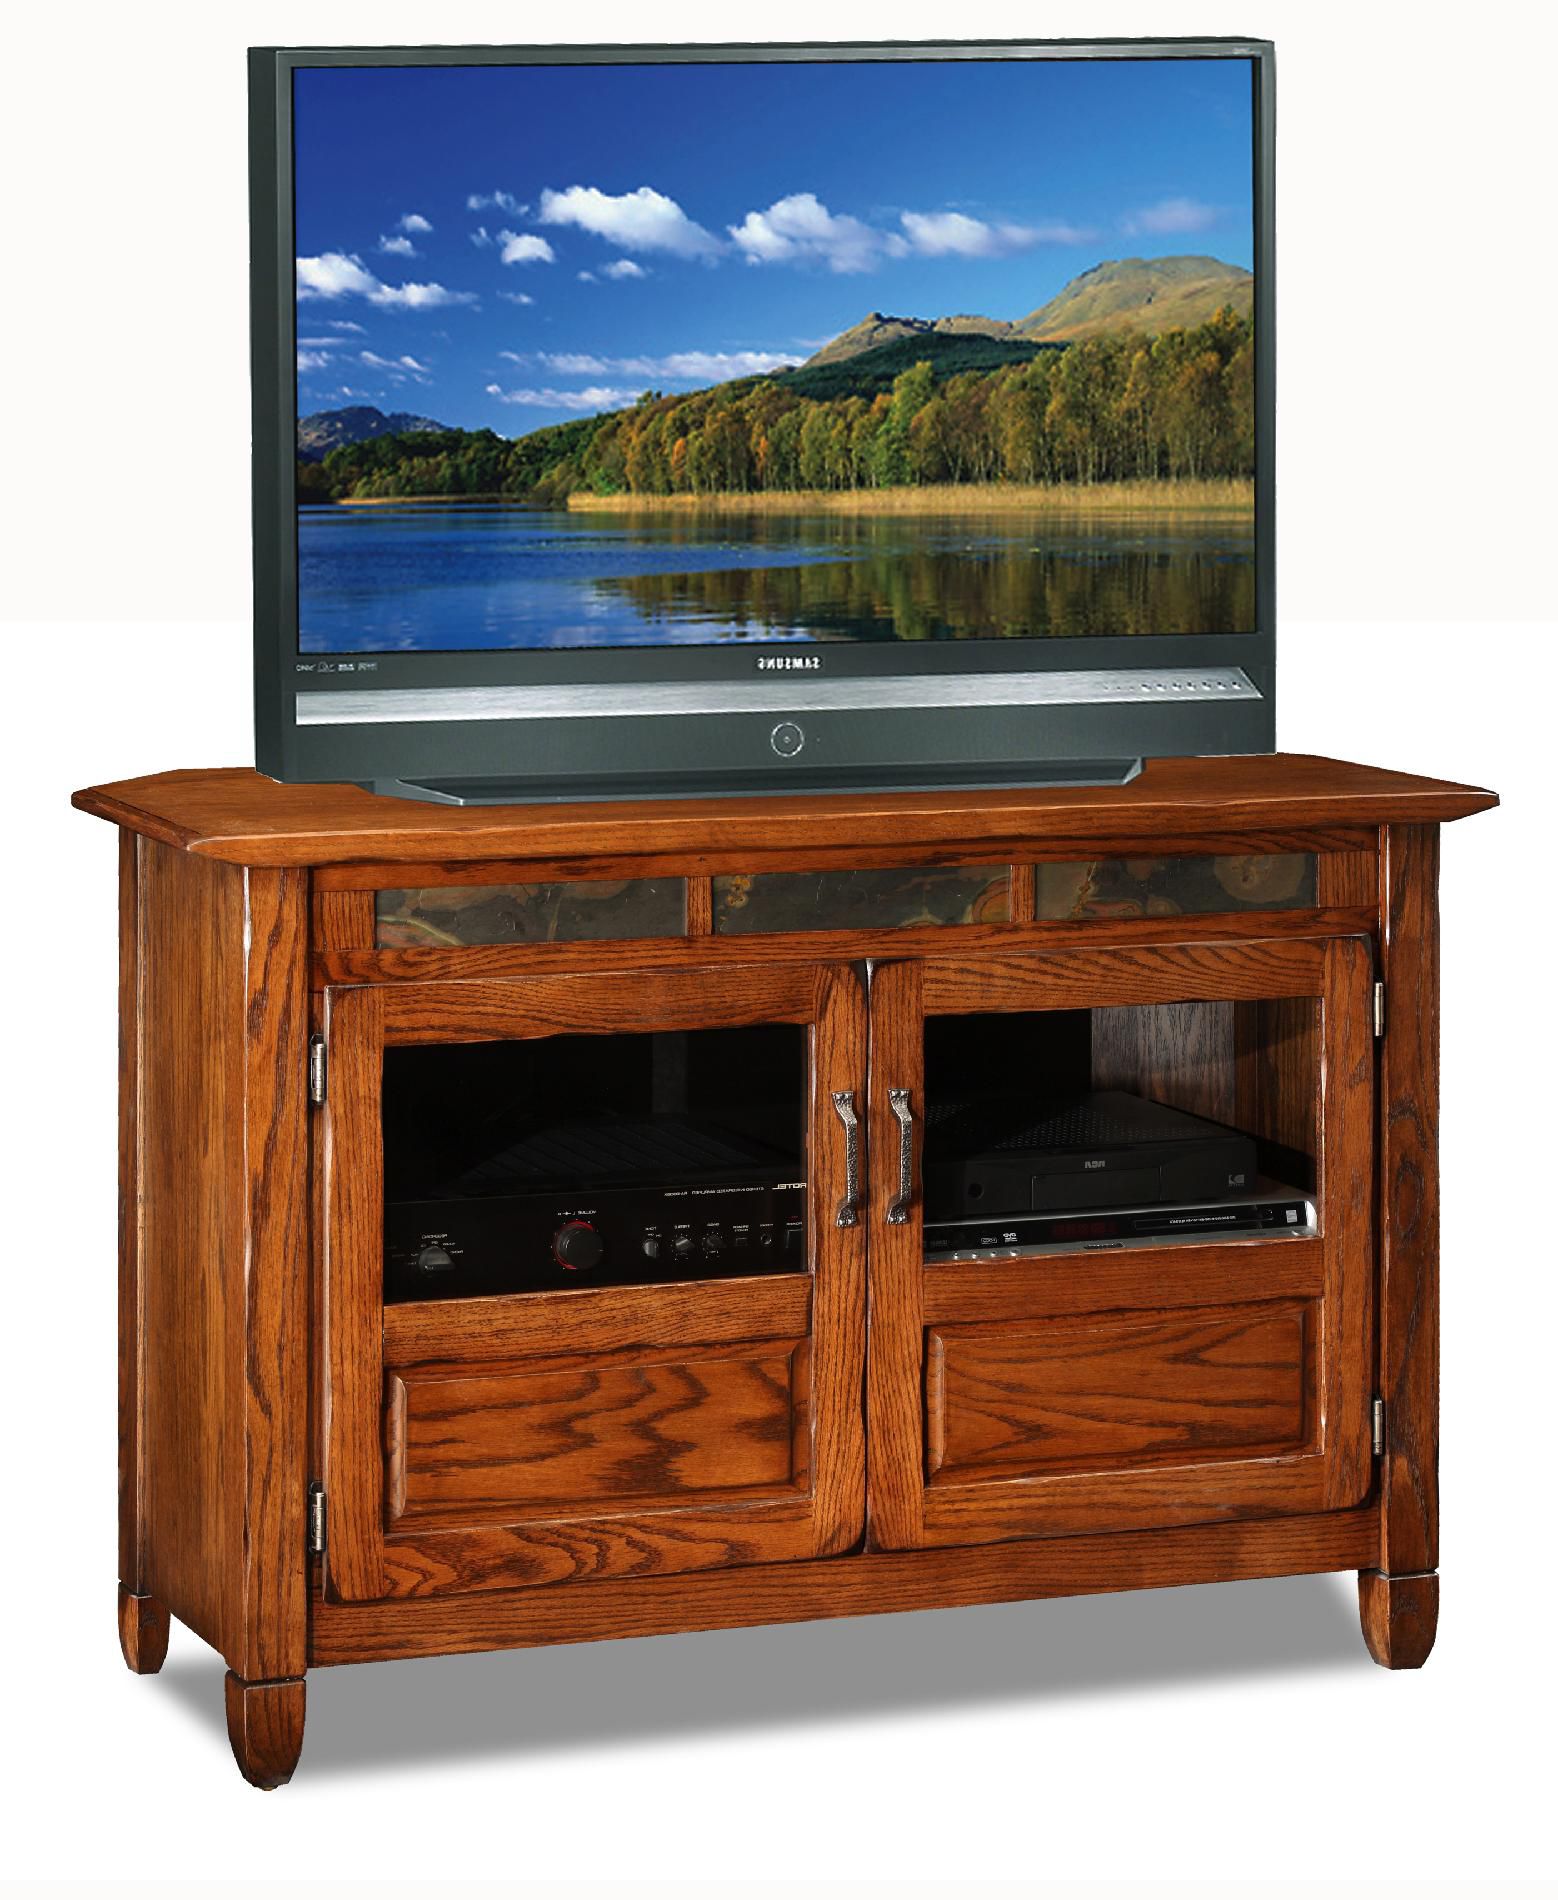 Leick Riley Holliday 46" TV Stand/Tall - Distressed Rustic ...